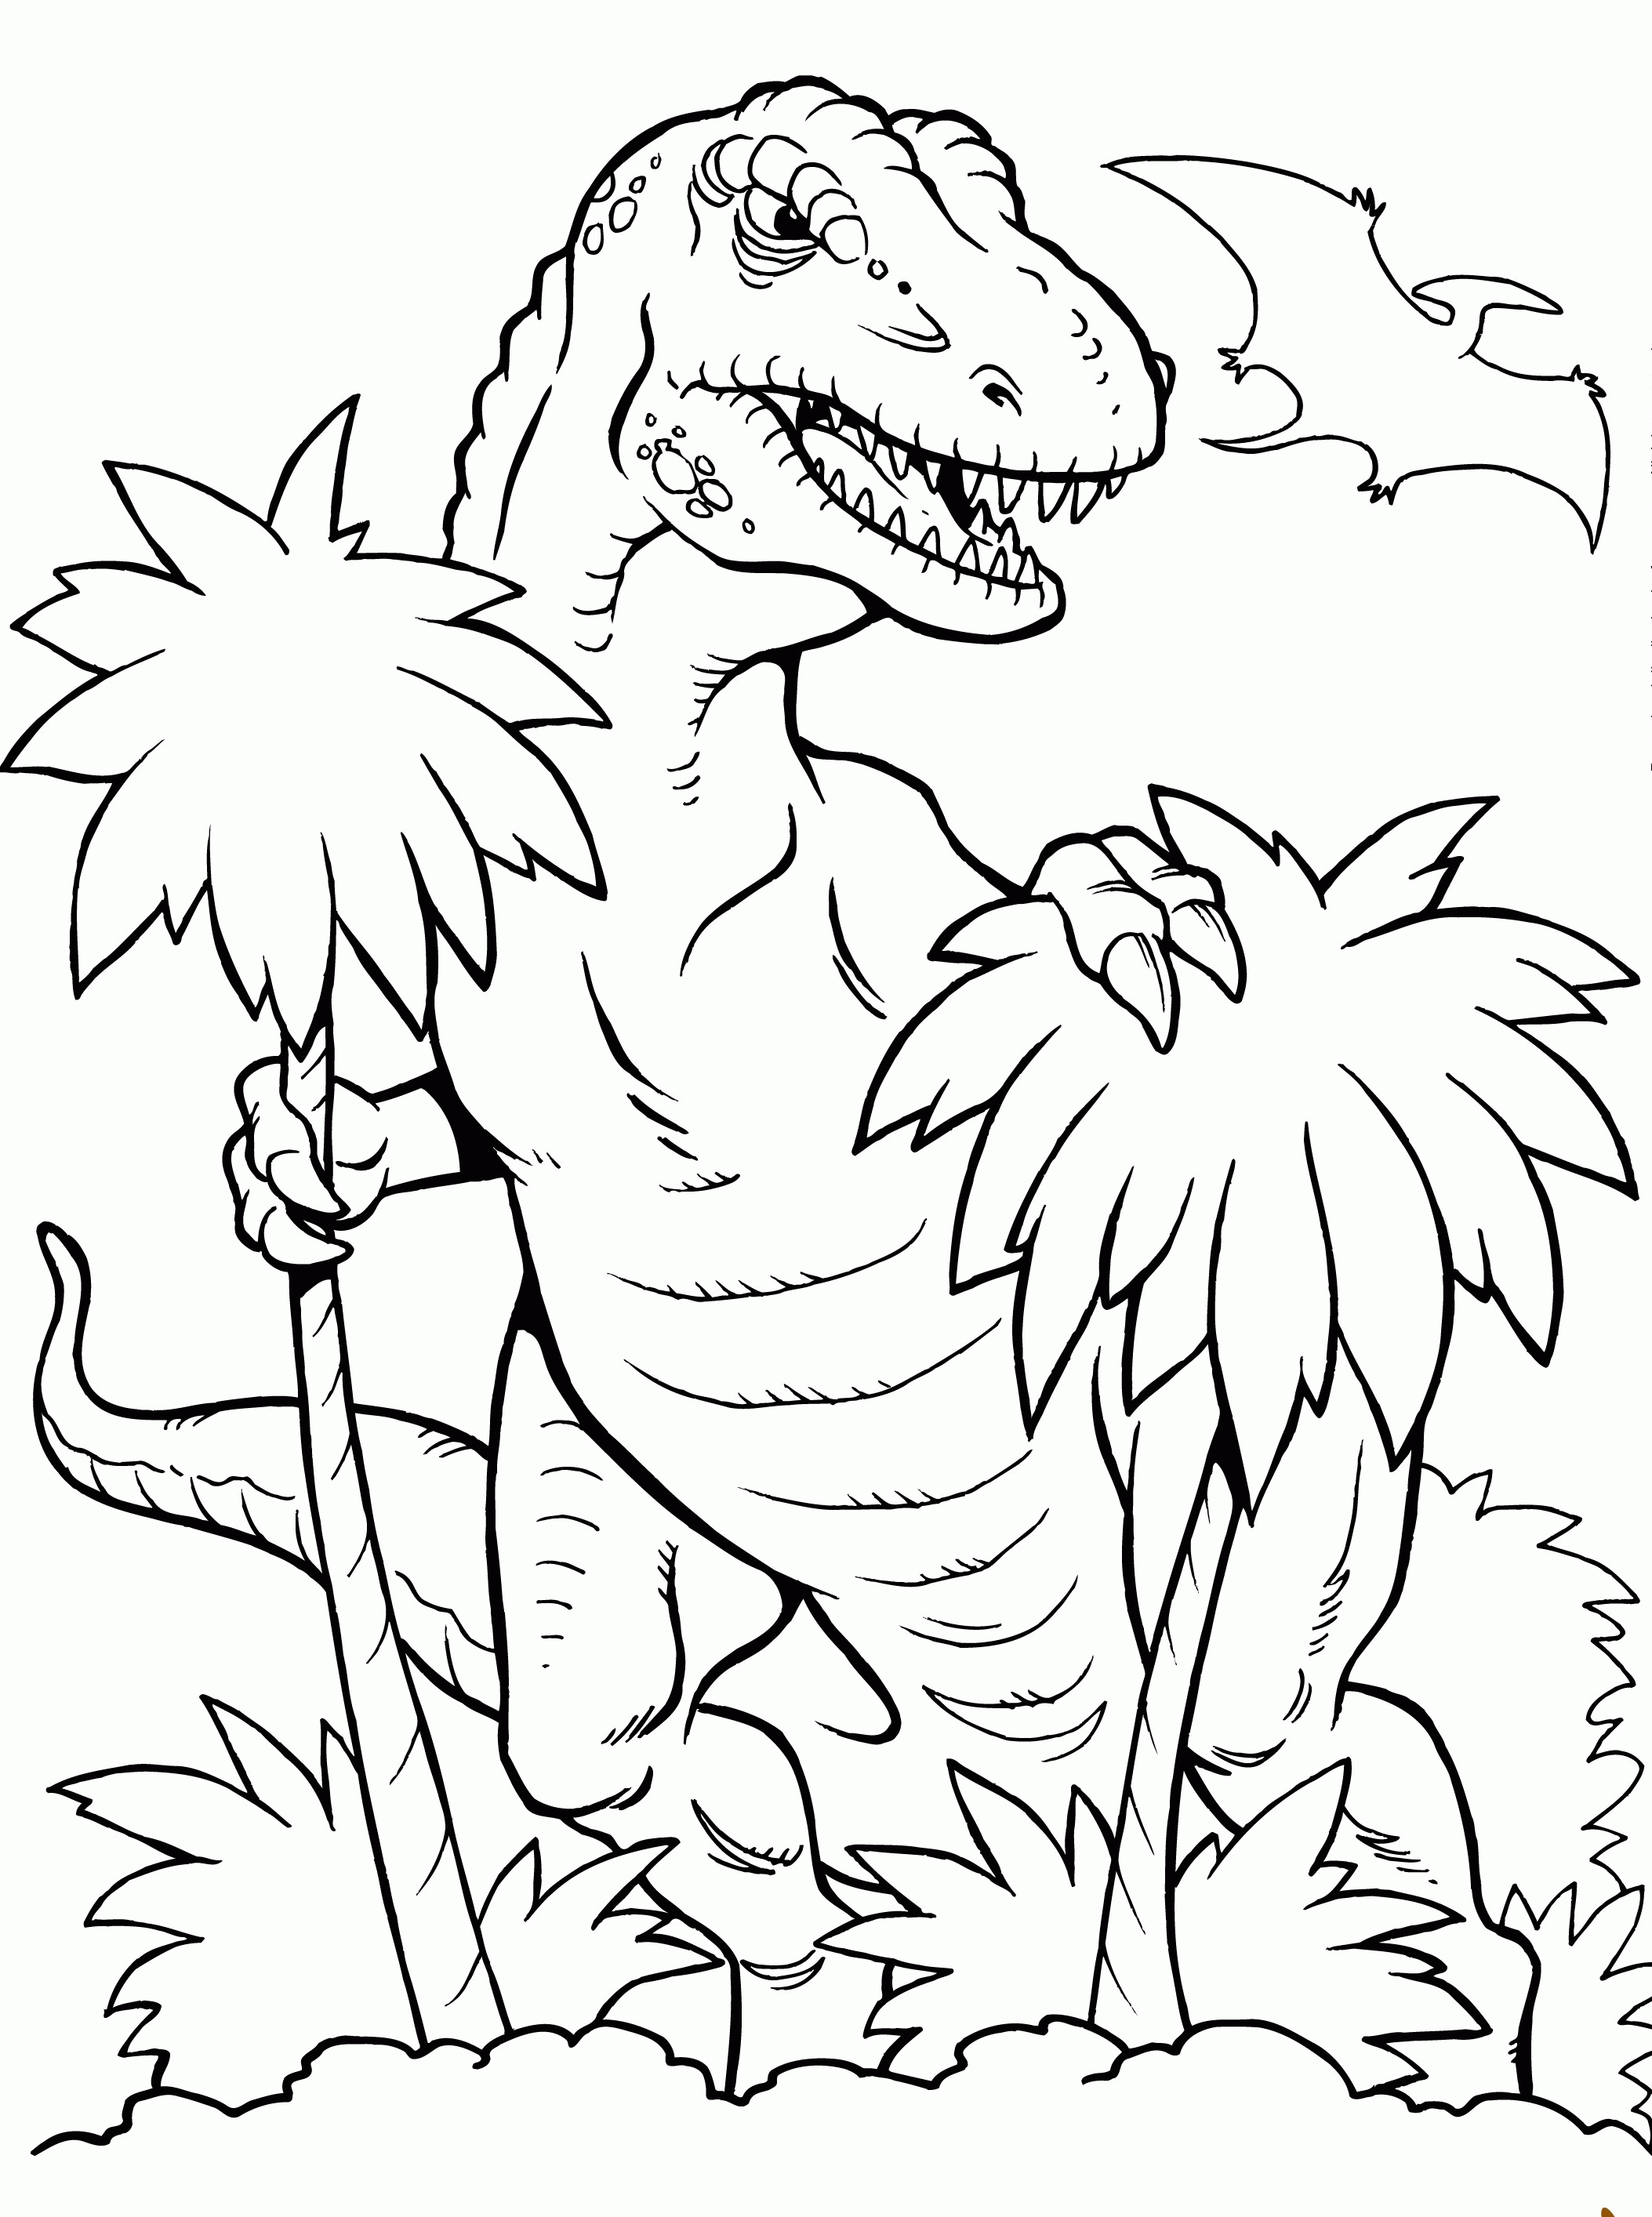 T. rex Coloring Pages and Book | Unique Coloring Pages